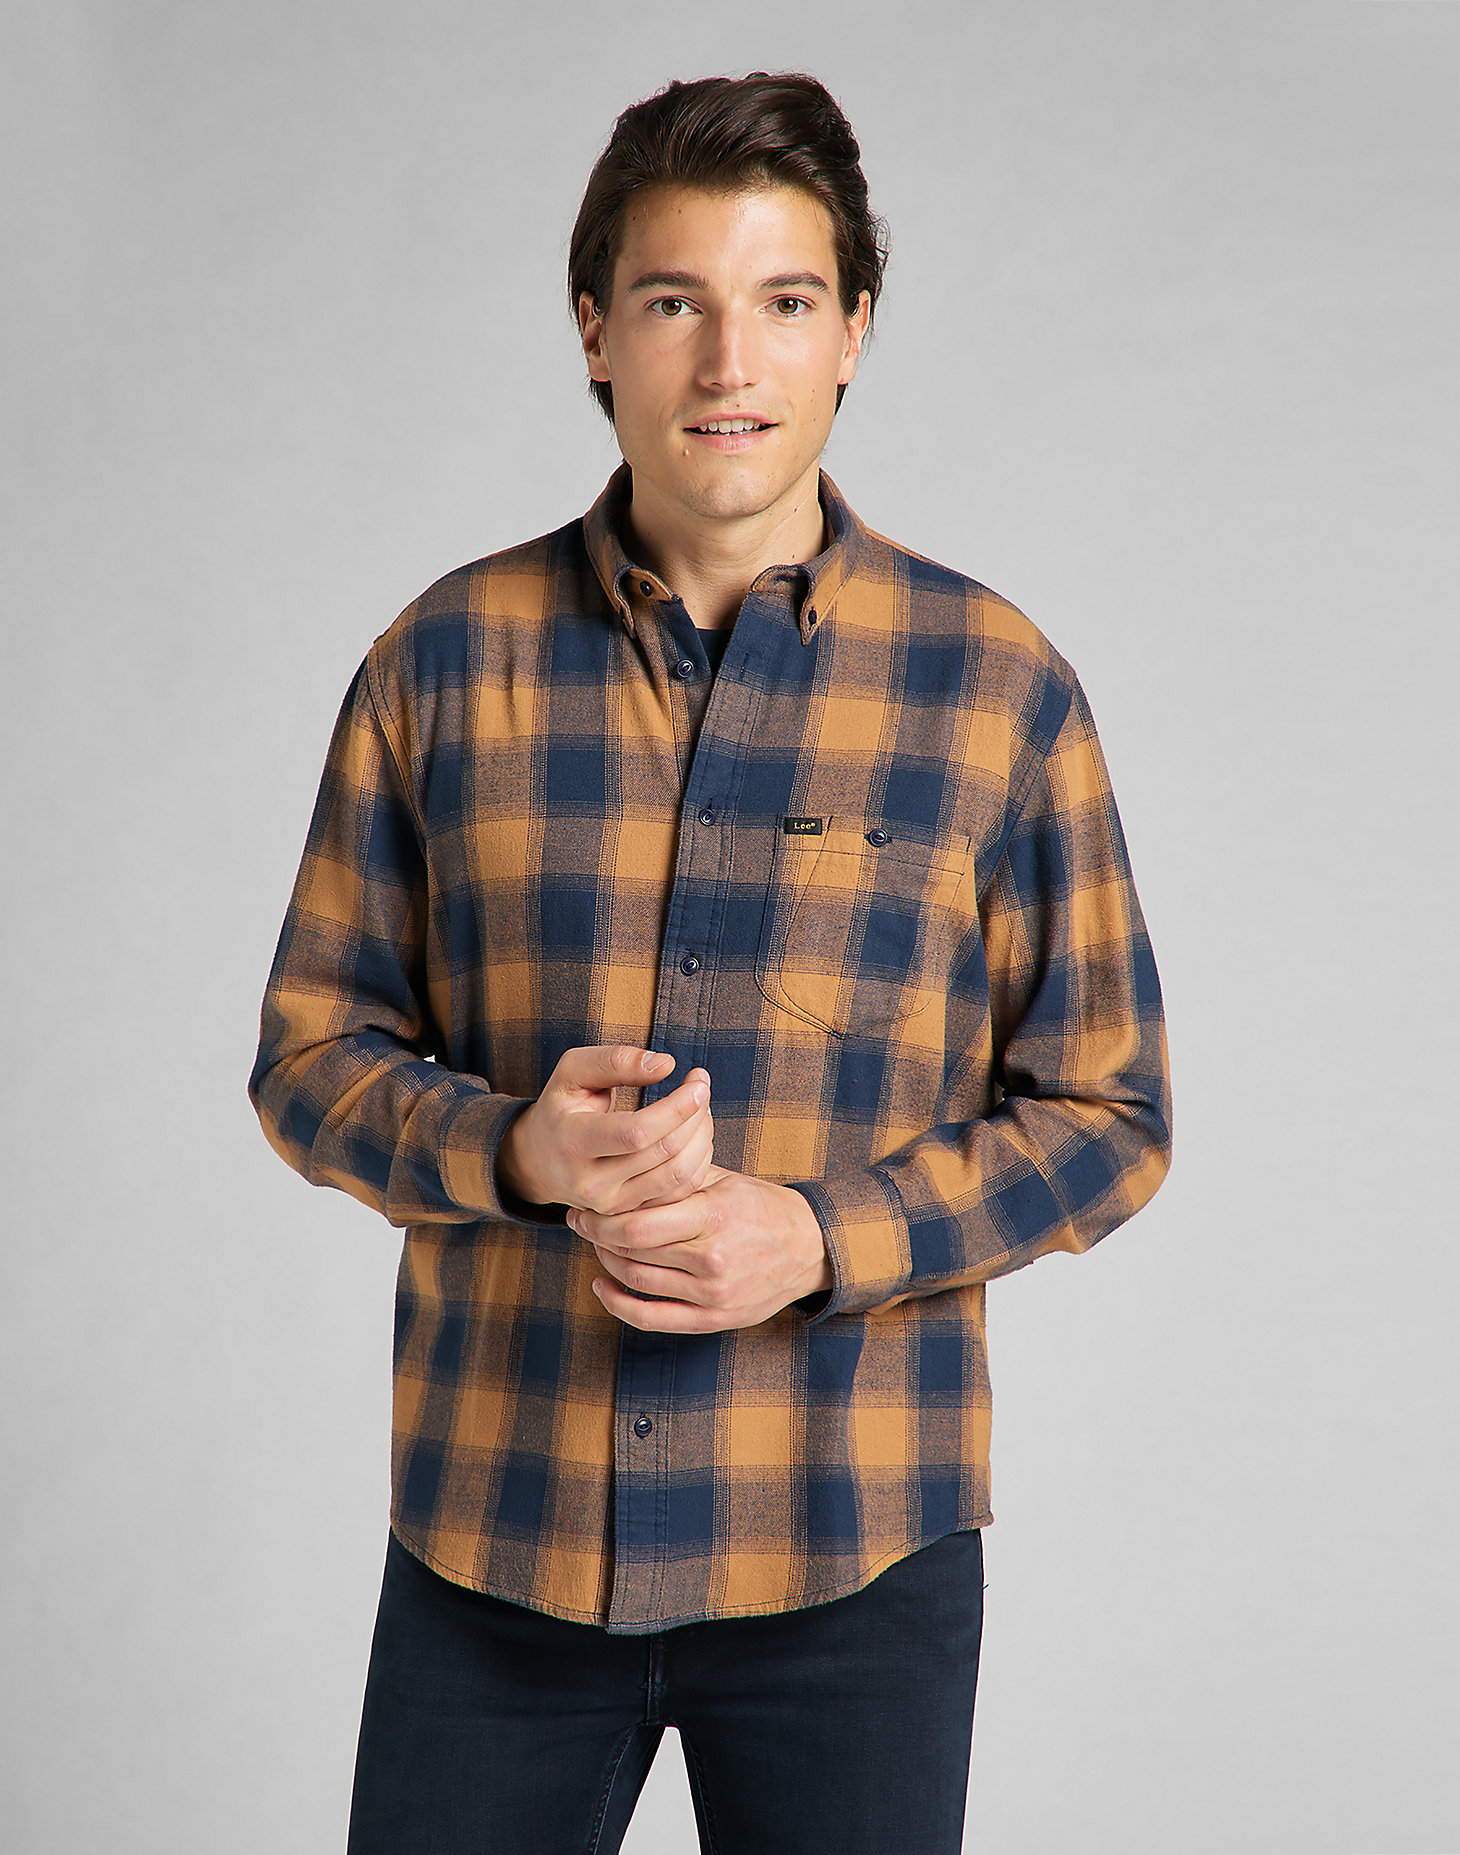 Riveted Shirt in Tobacco Brown alternative view 1